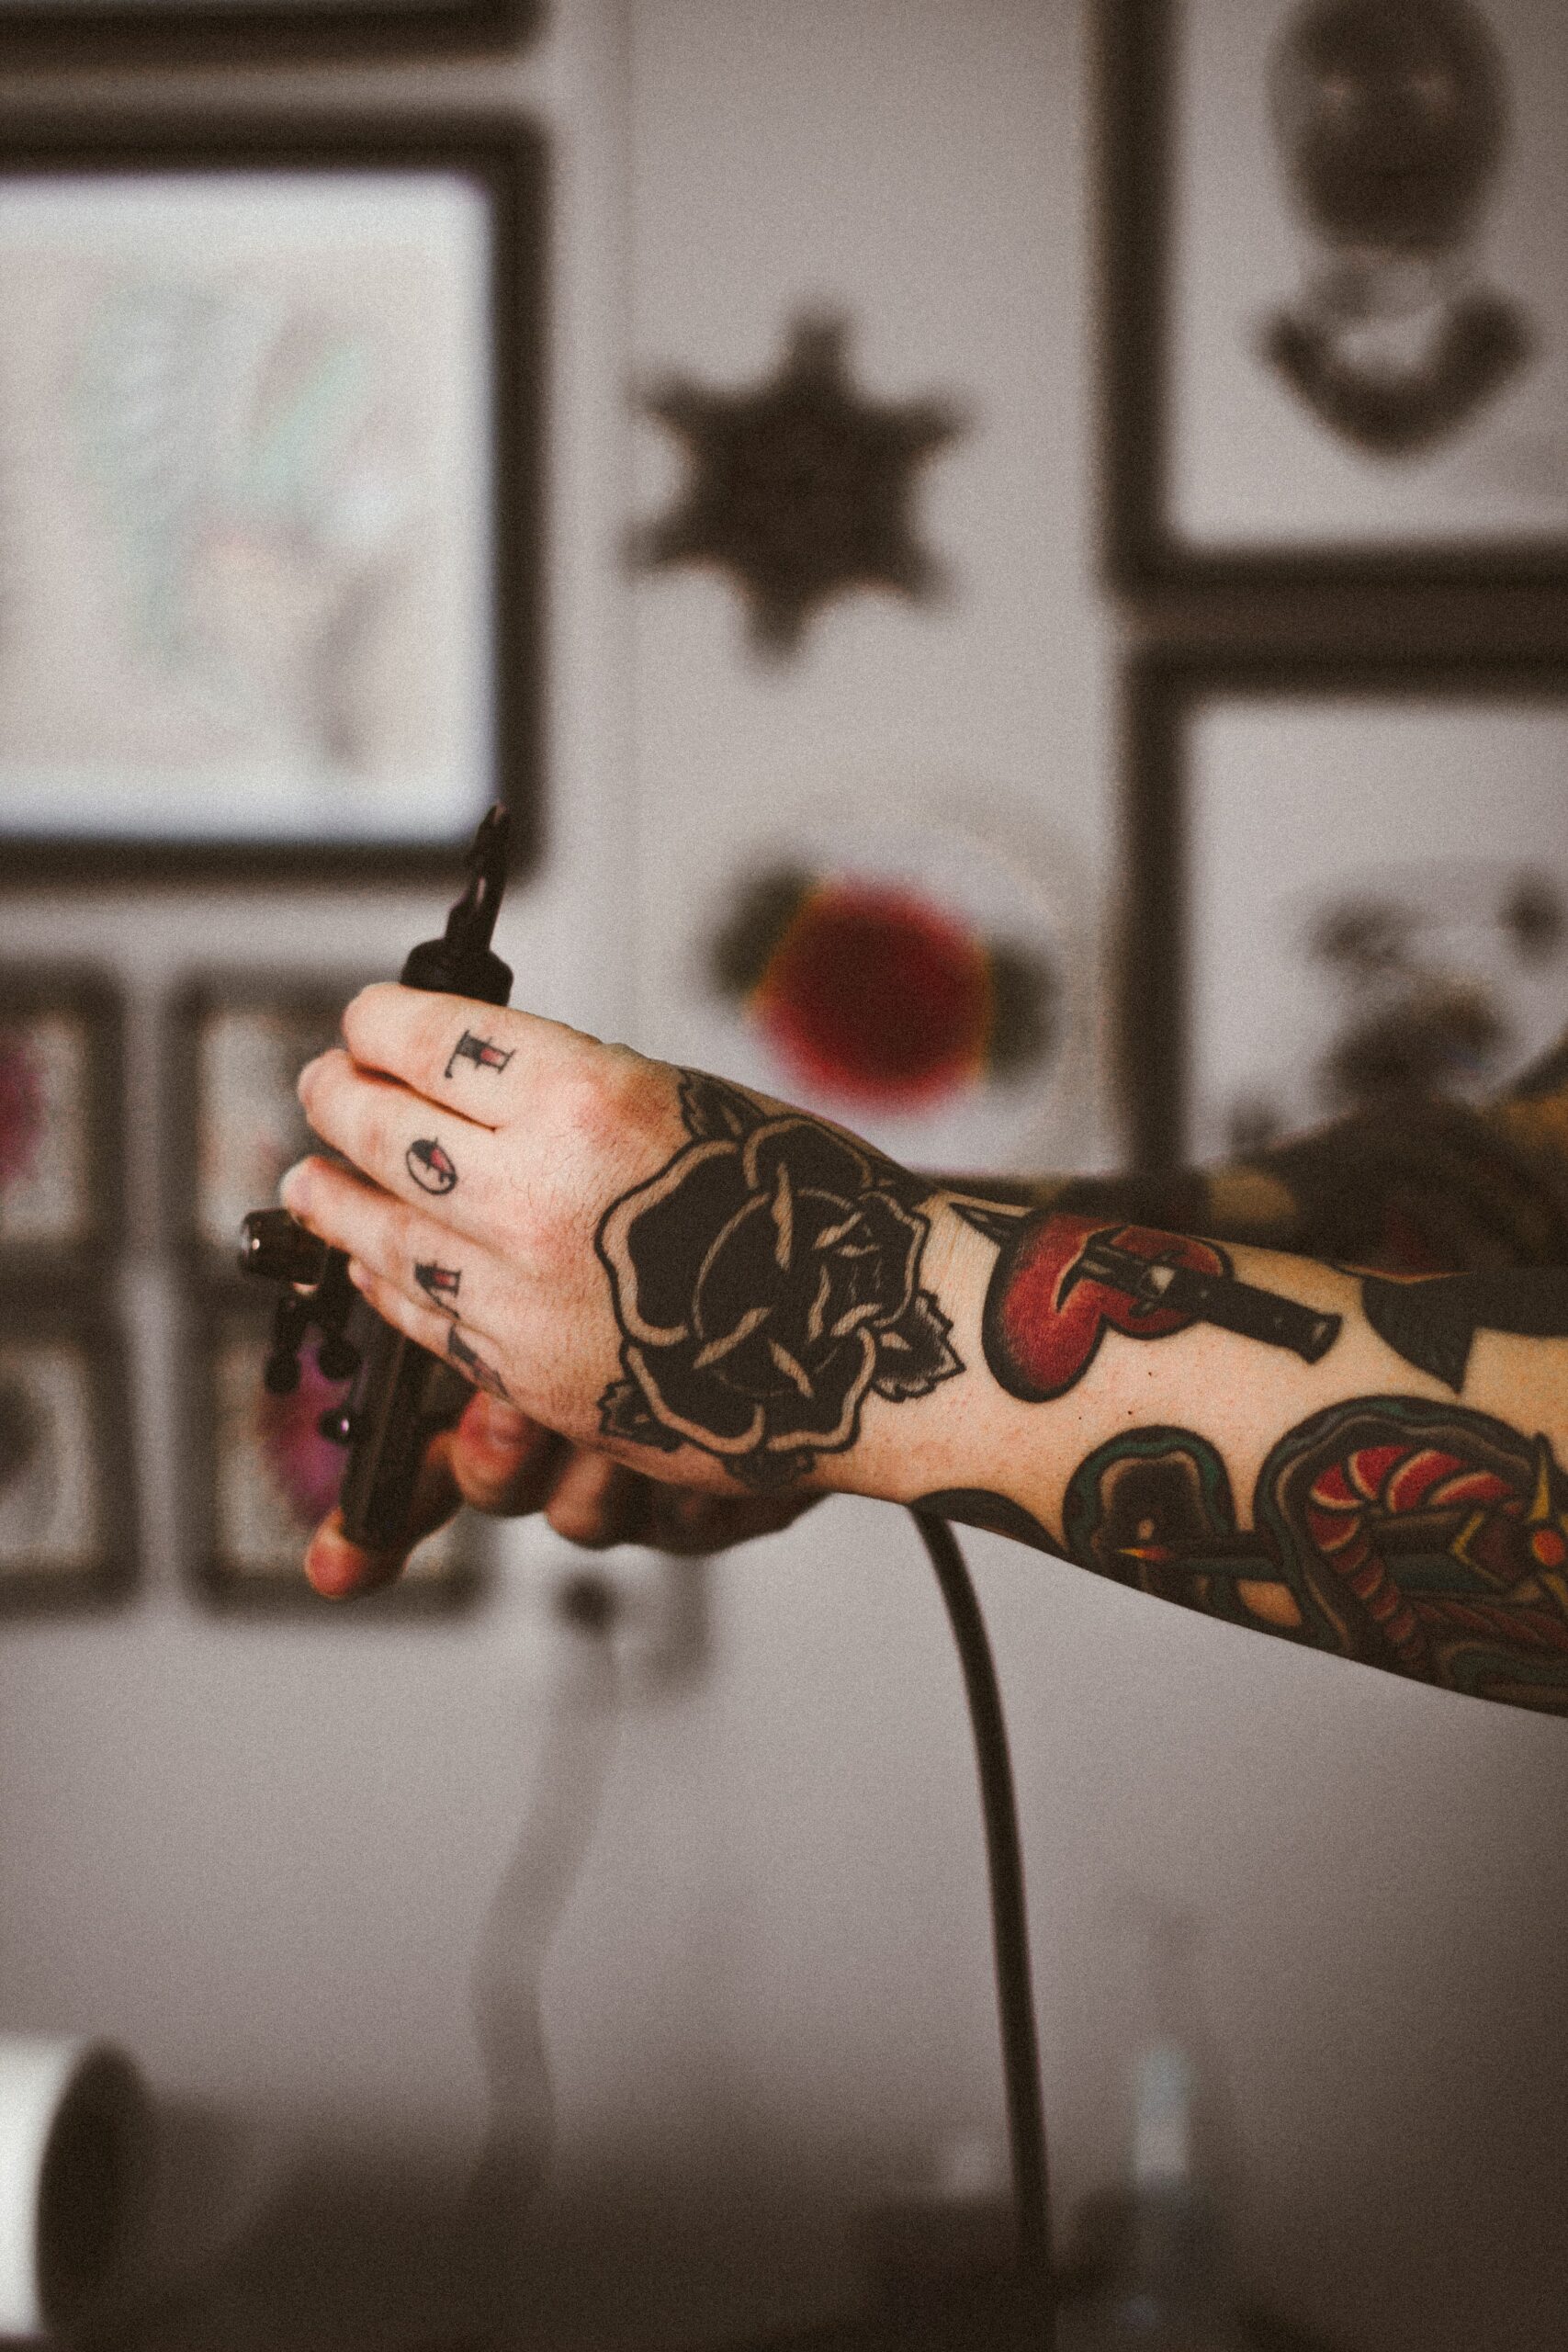 Inside a tattoo parlour, white background wall with framed designs blurred as image focuses on outstretched arms, covered in red and black tattoos (a heart with a sword going through it, flowers, etc.). One hand grasps a black needle